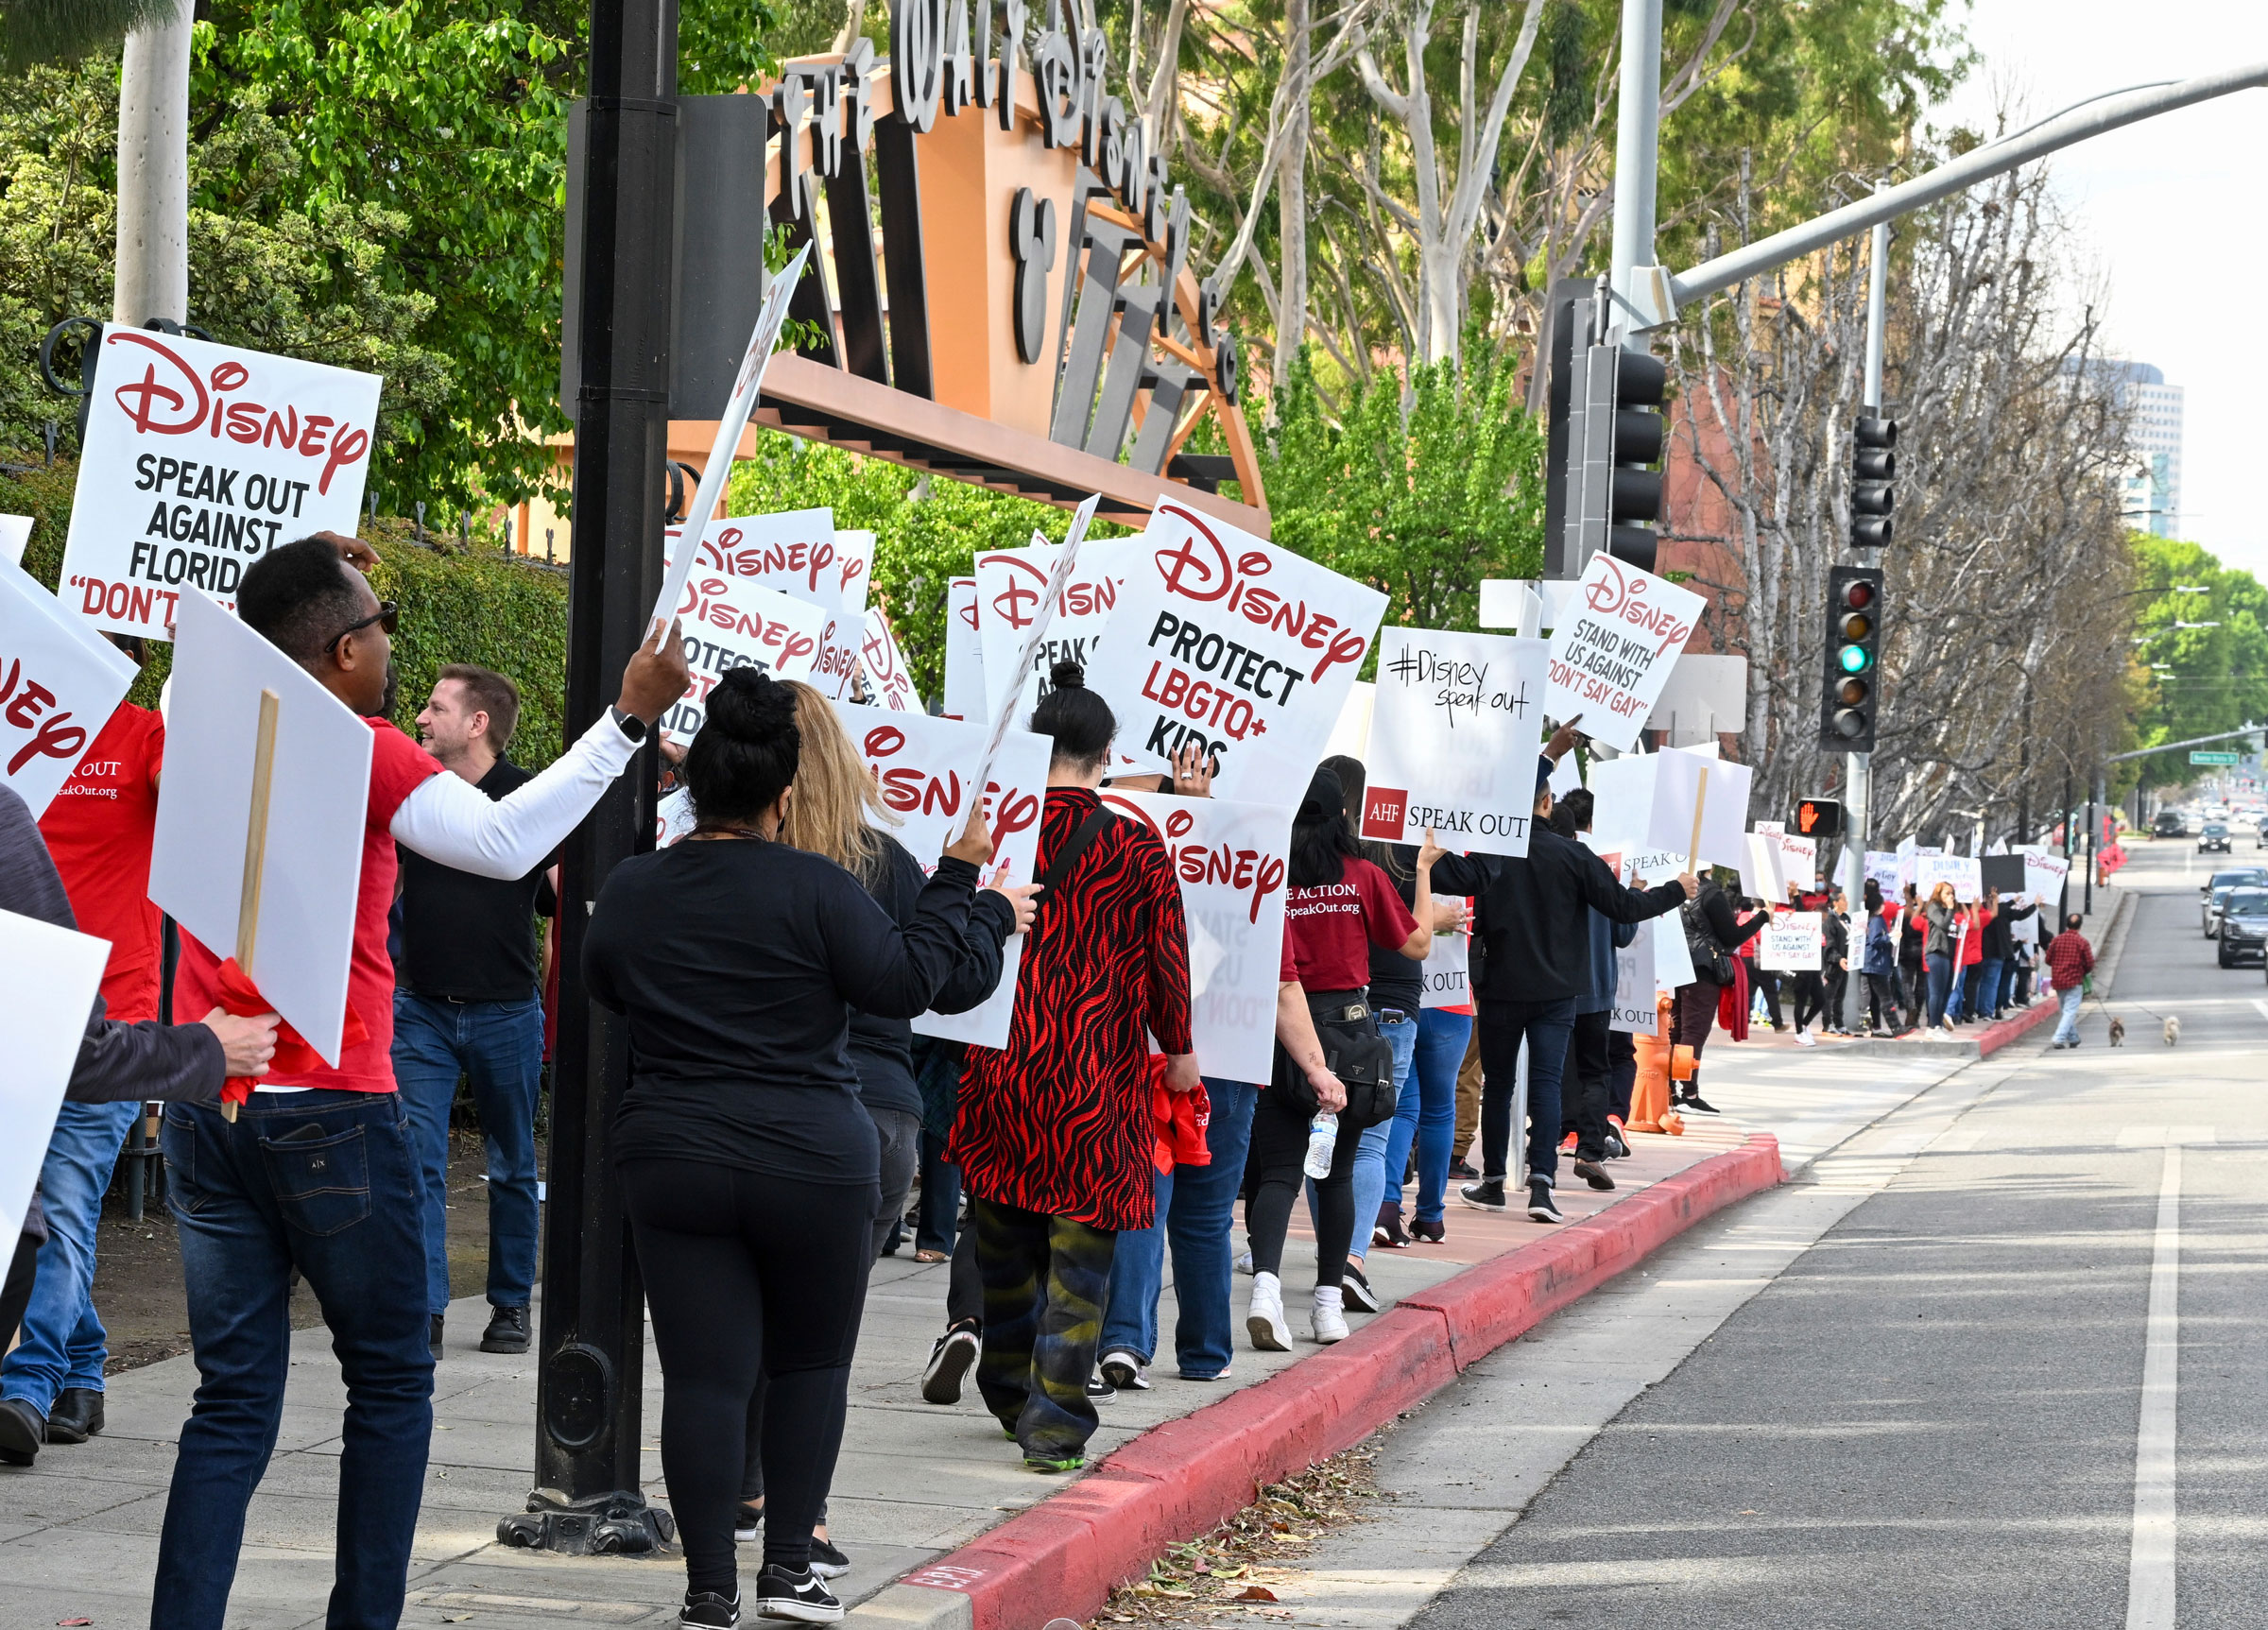 A crowd at a rally at the Walt Disney Company in Burbank spearheaded by advocates from AIDS Healthcare Foundation on Thursday, March 03, 2022 in Burbank, Calif. (Dan Steinberg—AP for AIDS Healthcare Foundation)